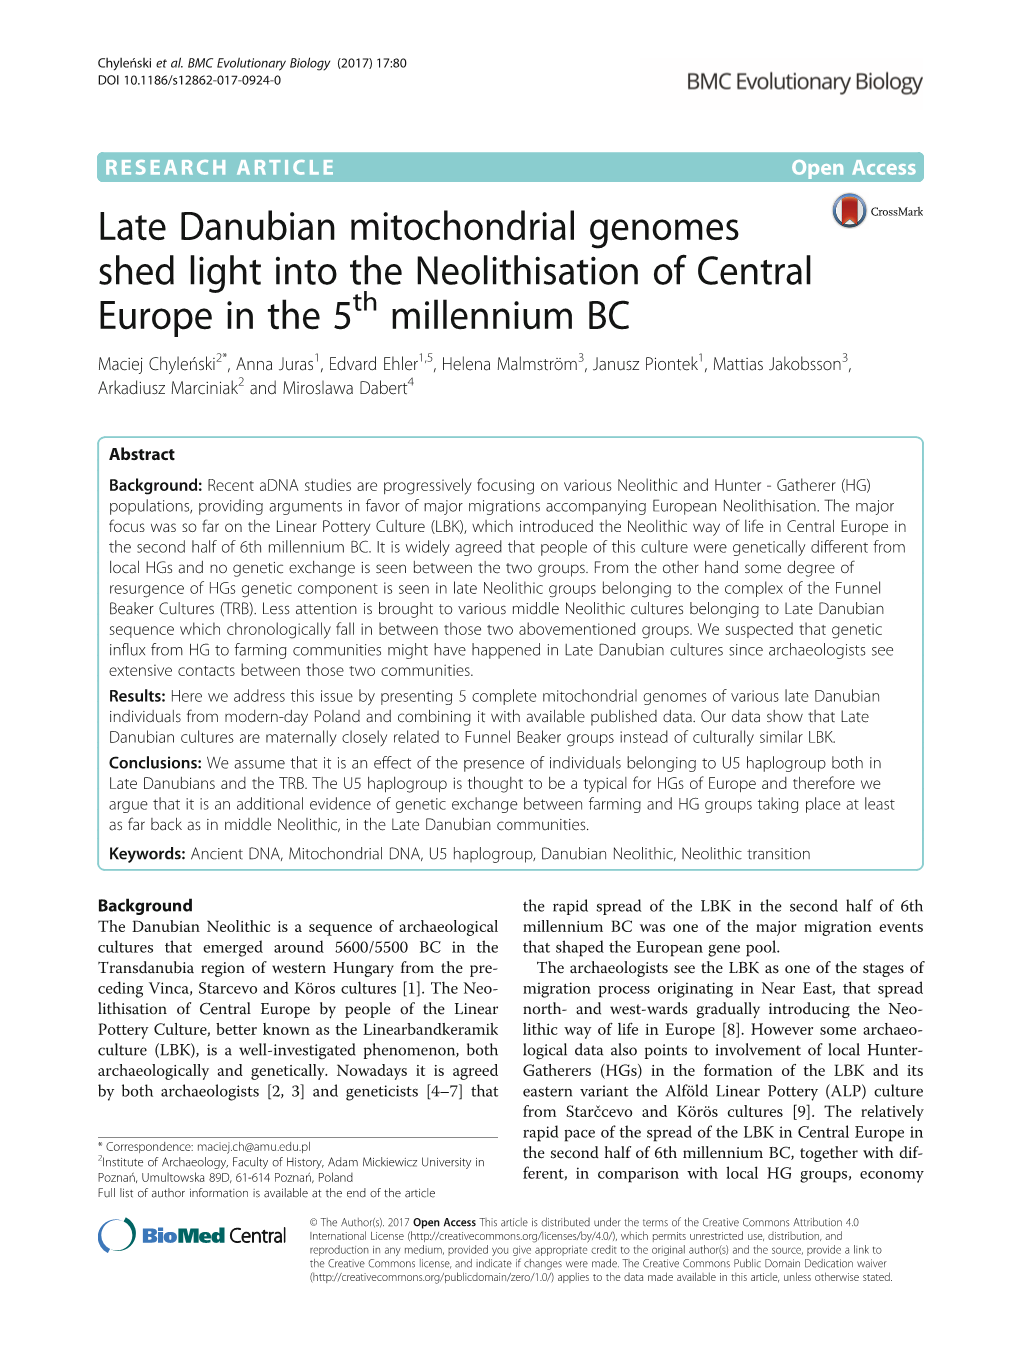 Late Danubian Mitochondrial Genomes Shed Light Into The